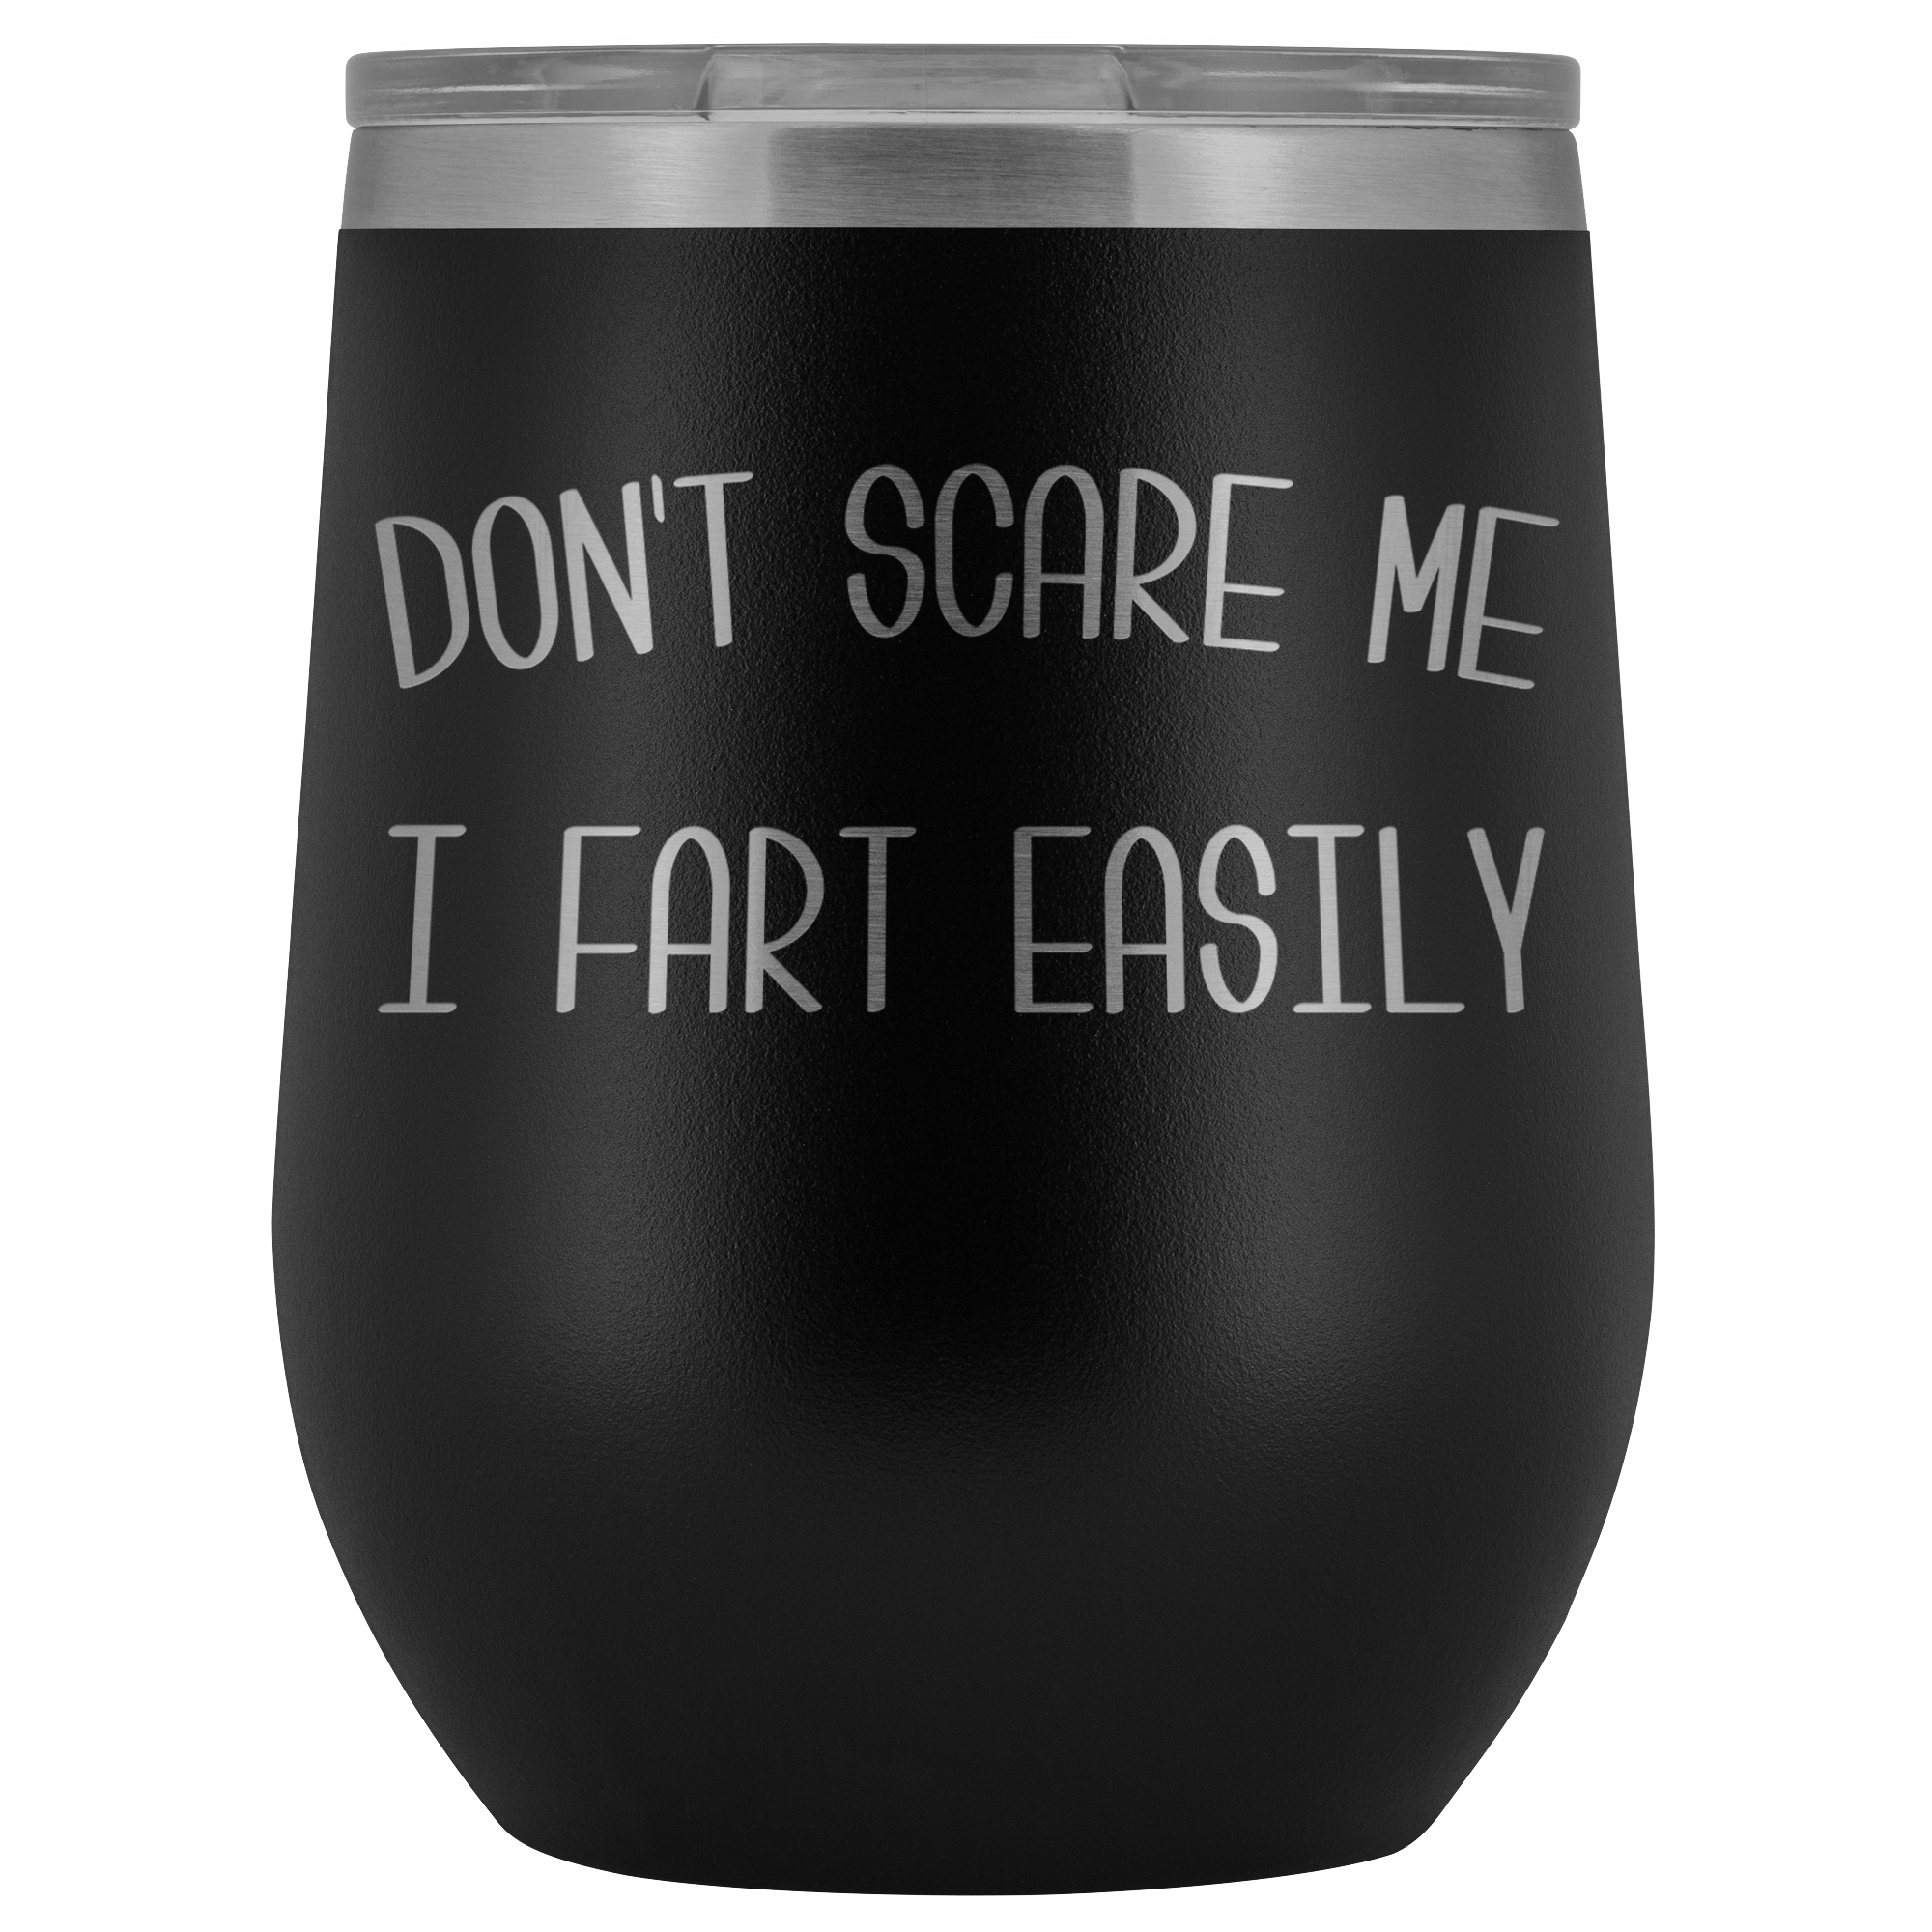 Don't Scare Me I Fart Easily Funny Old Age Gift Stemless Insulated Wine Tumbler Hot Cold BPA Free 12oz Travel Cup